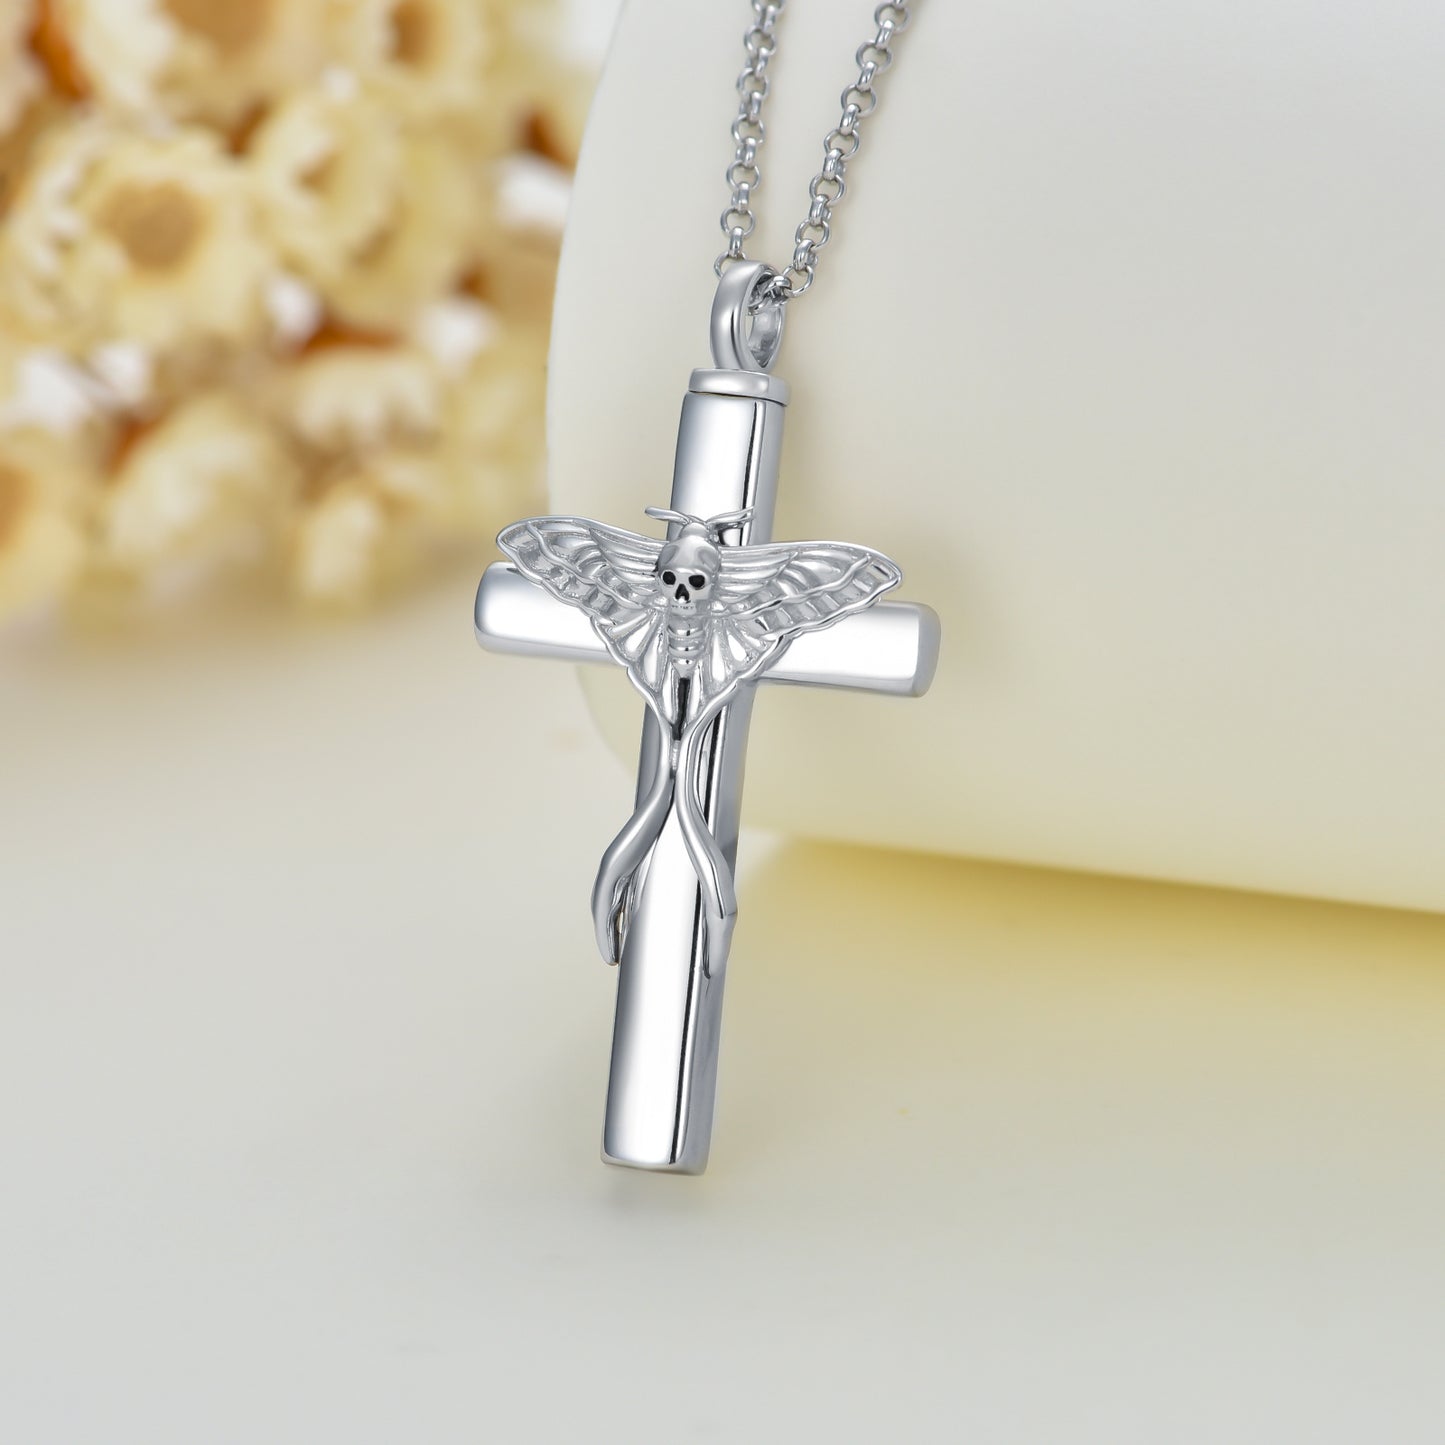 YFN S925 Cross Urn Necklace for Ashes Skull Moth Necklace Cremation Pendant Memorial Keepsake Jewelry (Gift Box included)